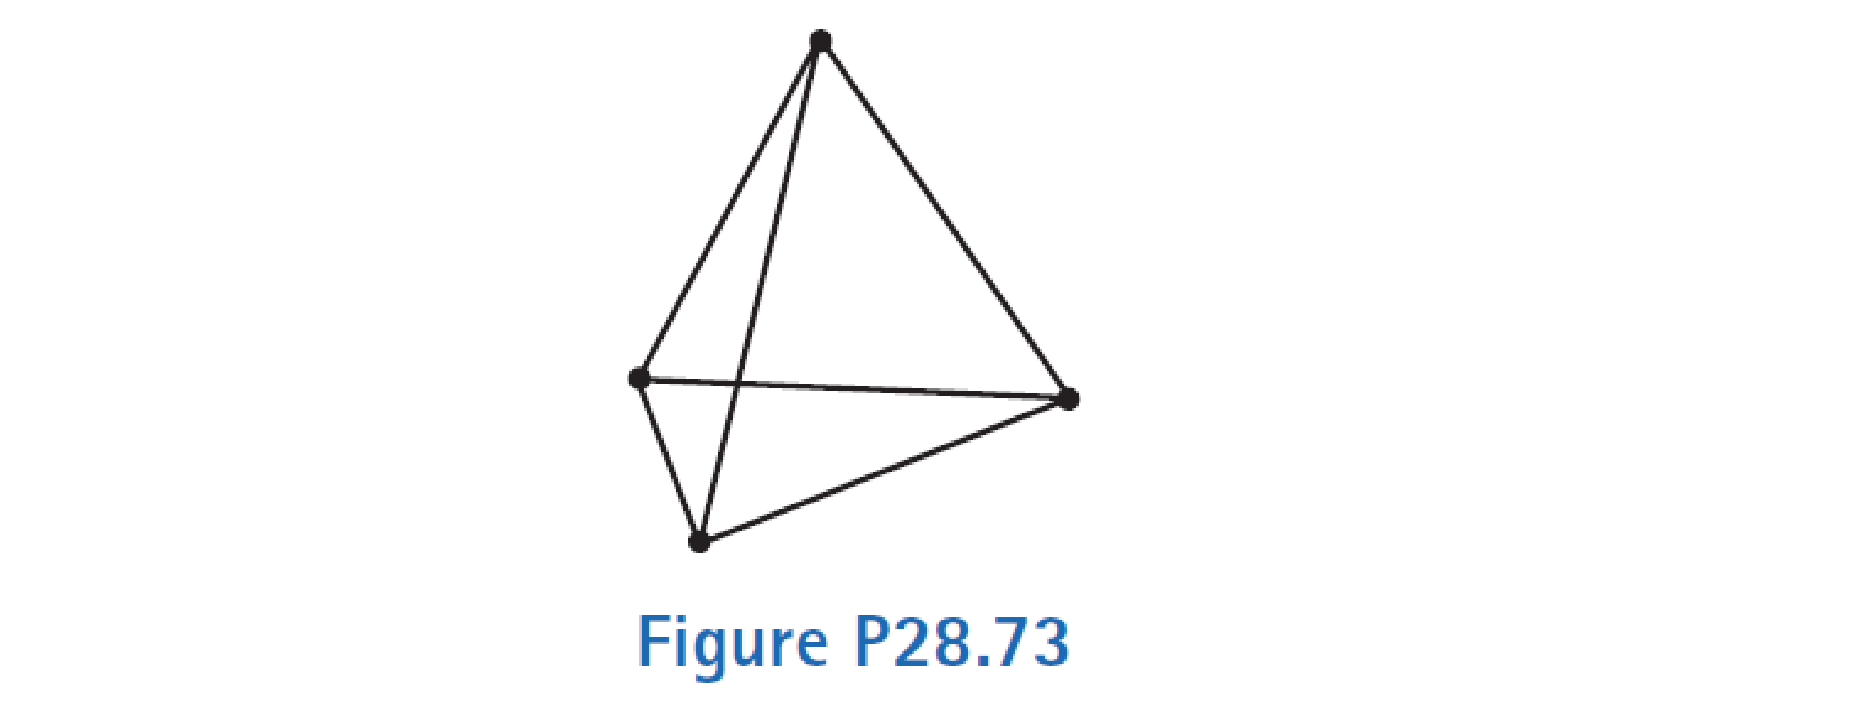 Chapter 28, Problem 73AP, A regular tetrahedron is a pyramid with a triangular base and triangular sides as shown in Figure 